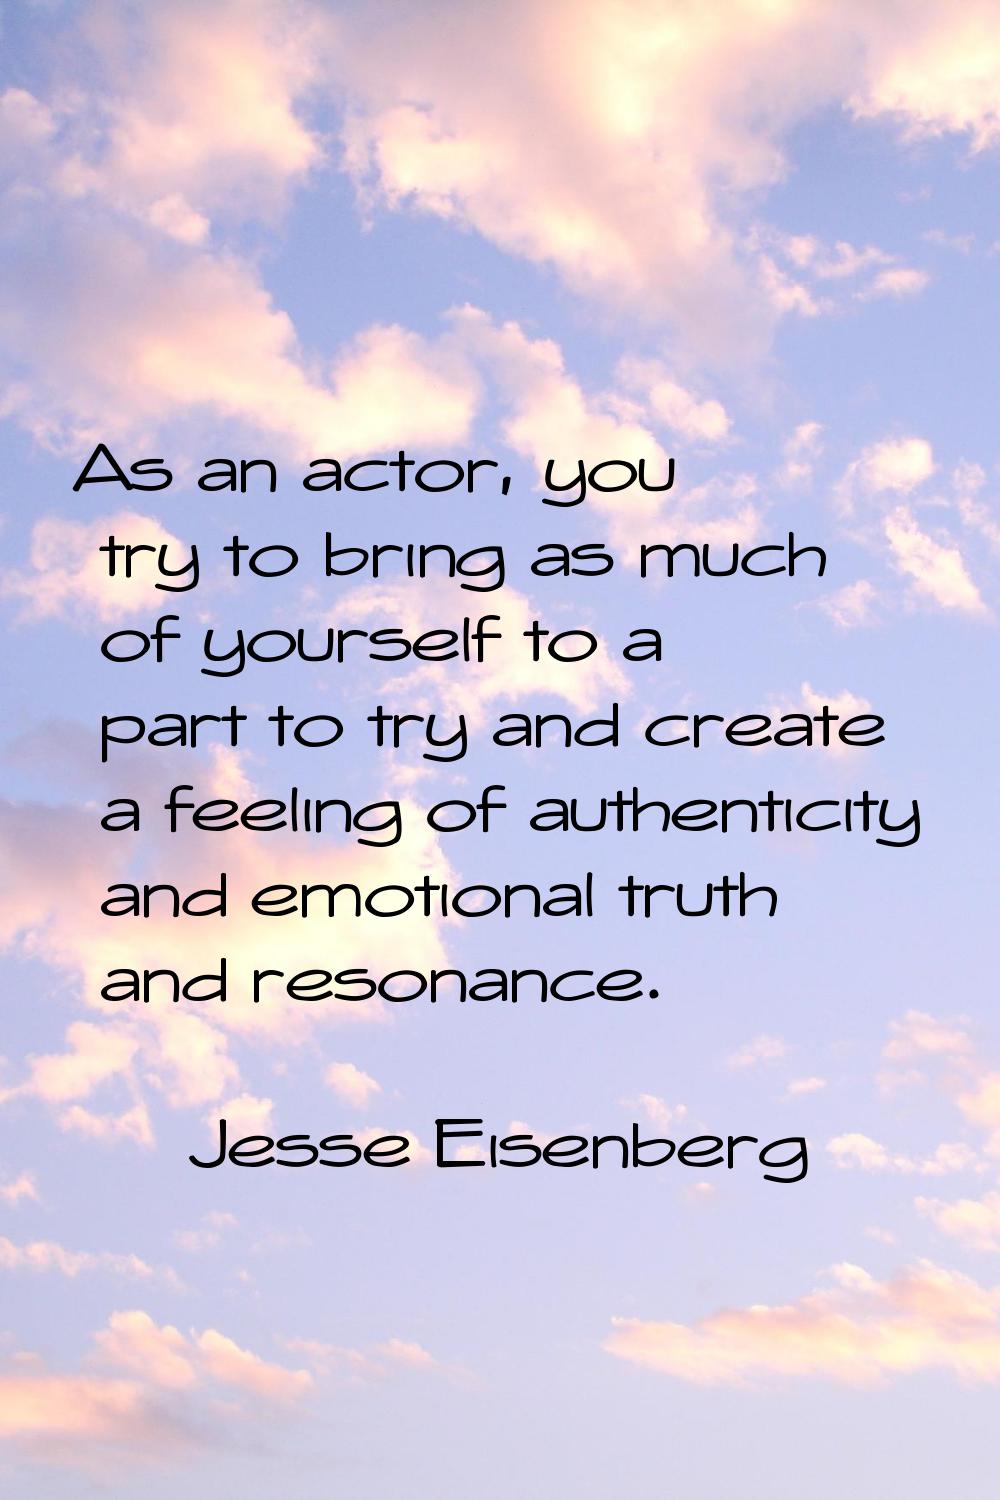 As an actor, you try to bring as much of yourself to a part to try and create a feeling of authenti